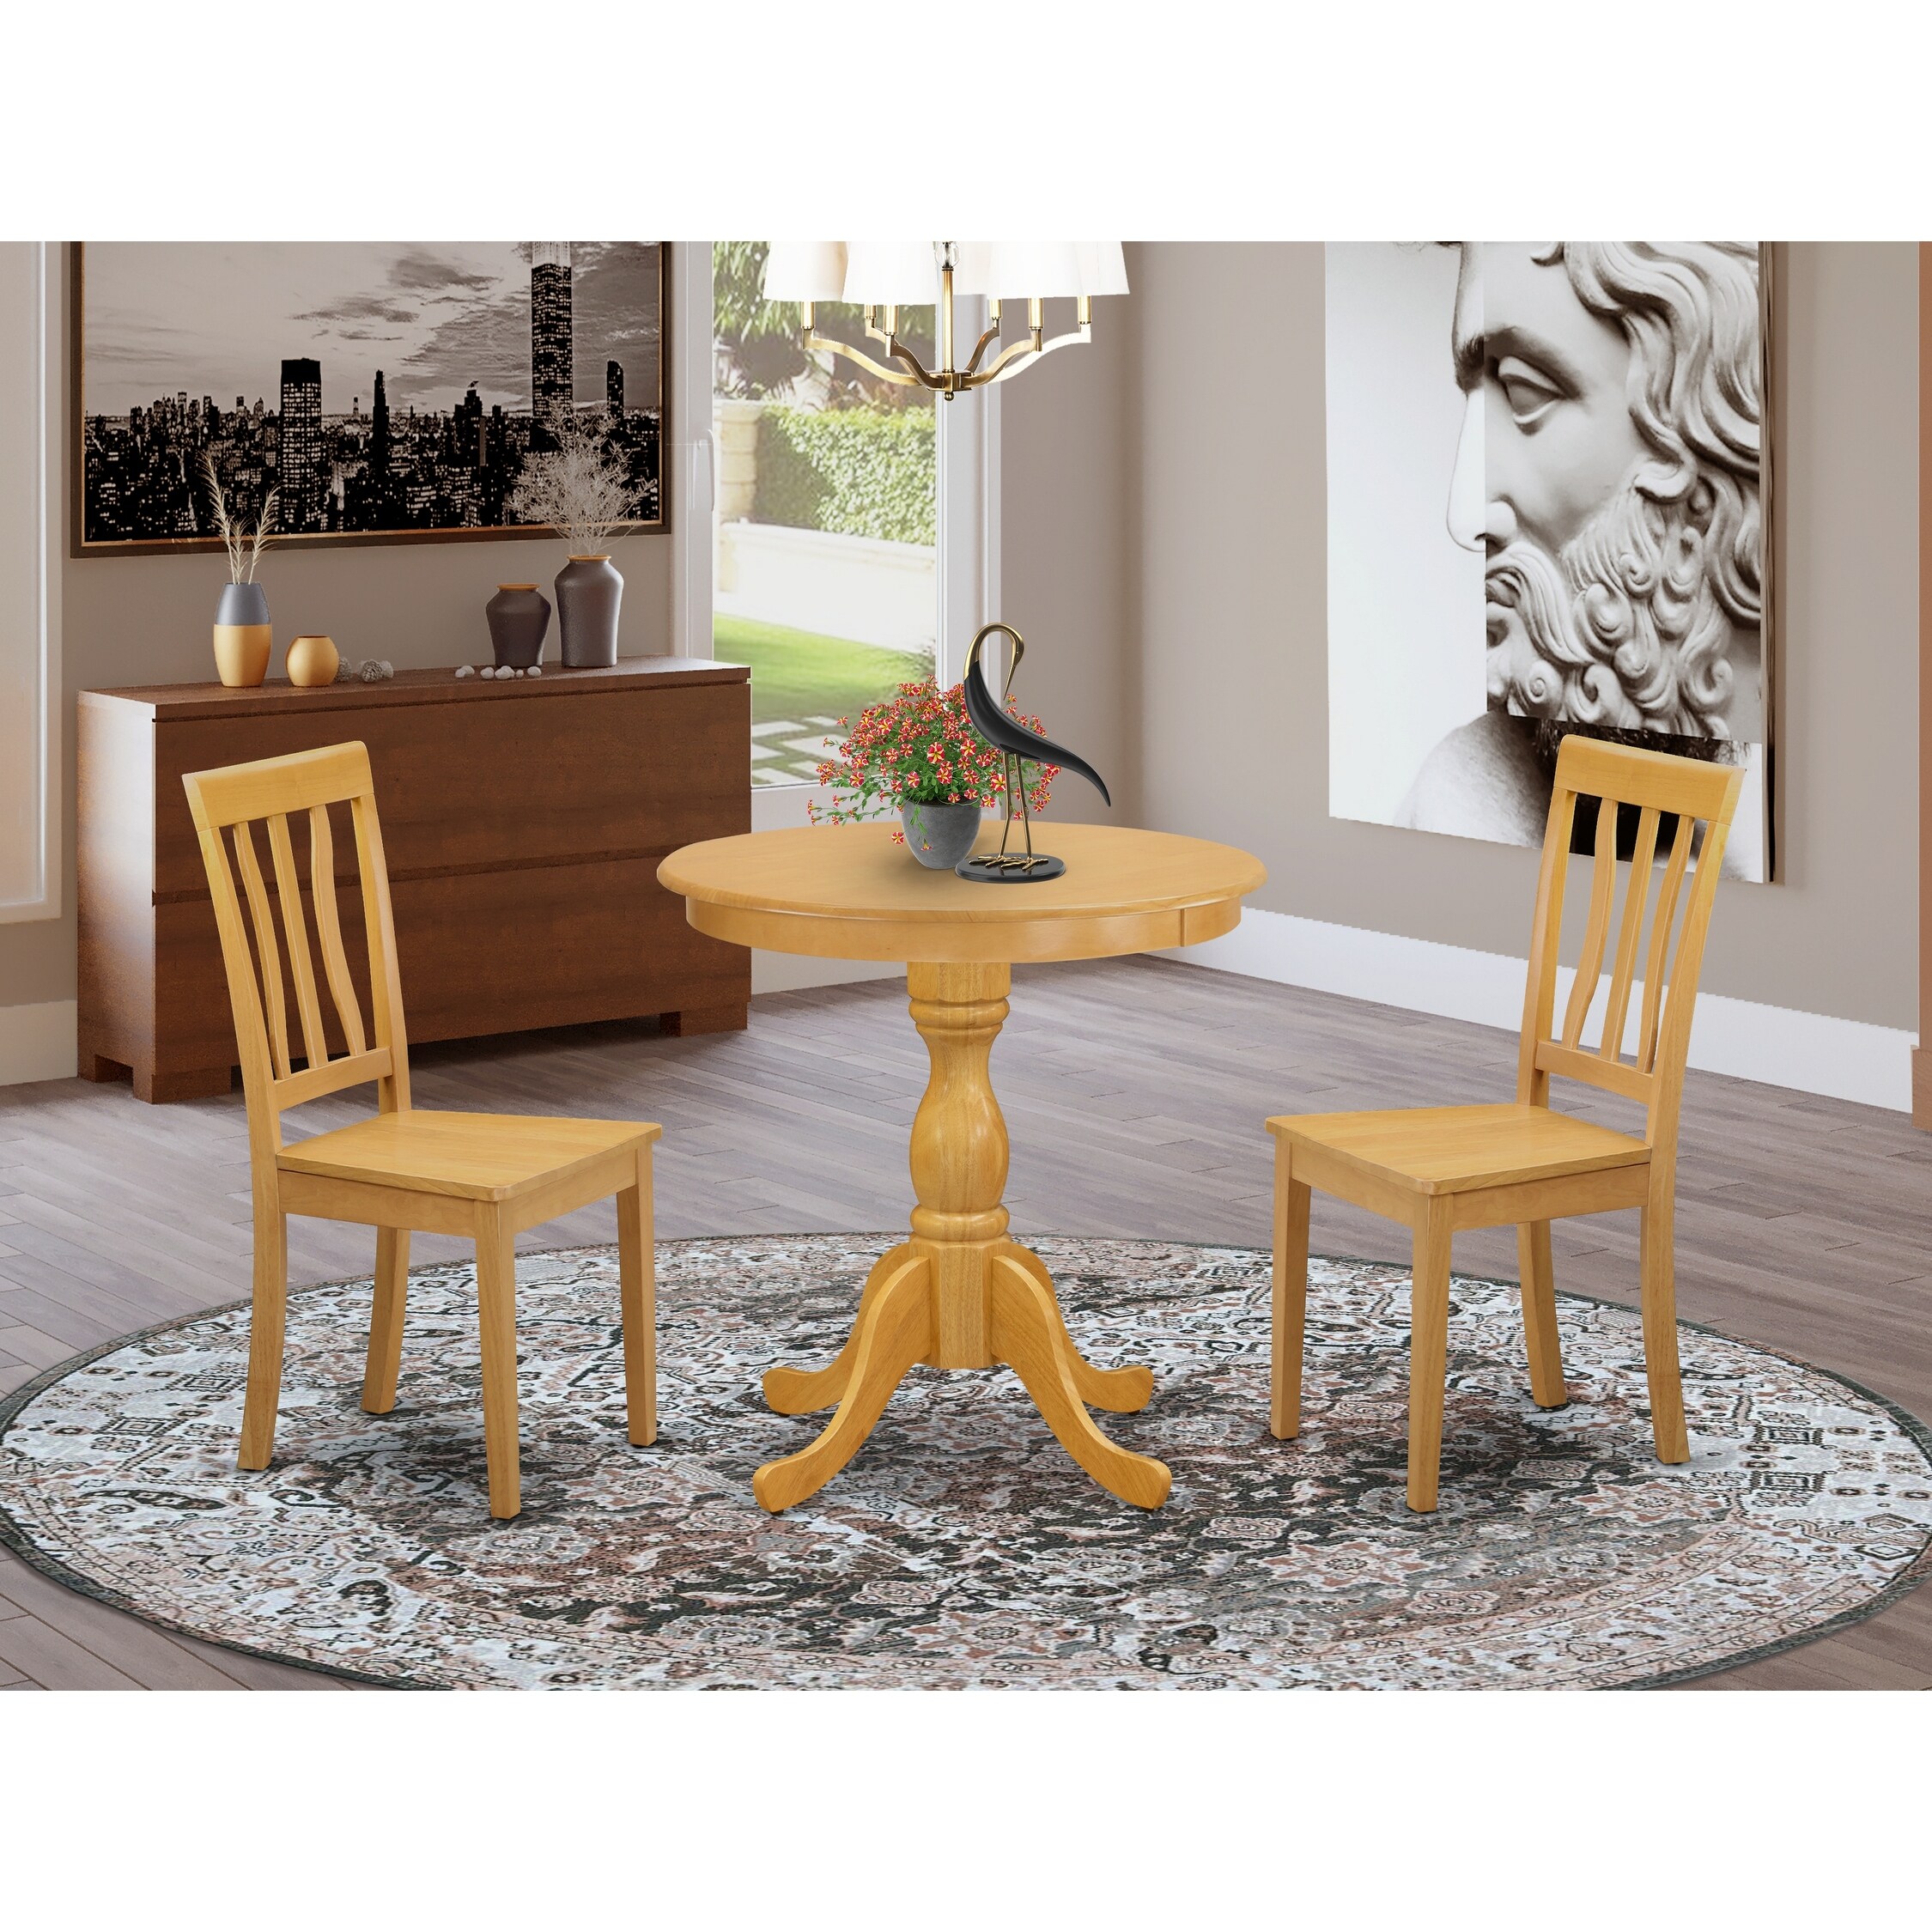 East West Furniture 3 Piece Kitchen Table Set- A Round Dining Table And 2 Dining Room Chairs  (finish and Chair Seat Options)